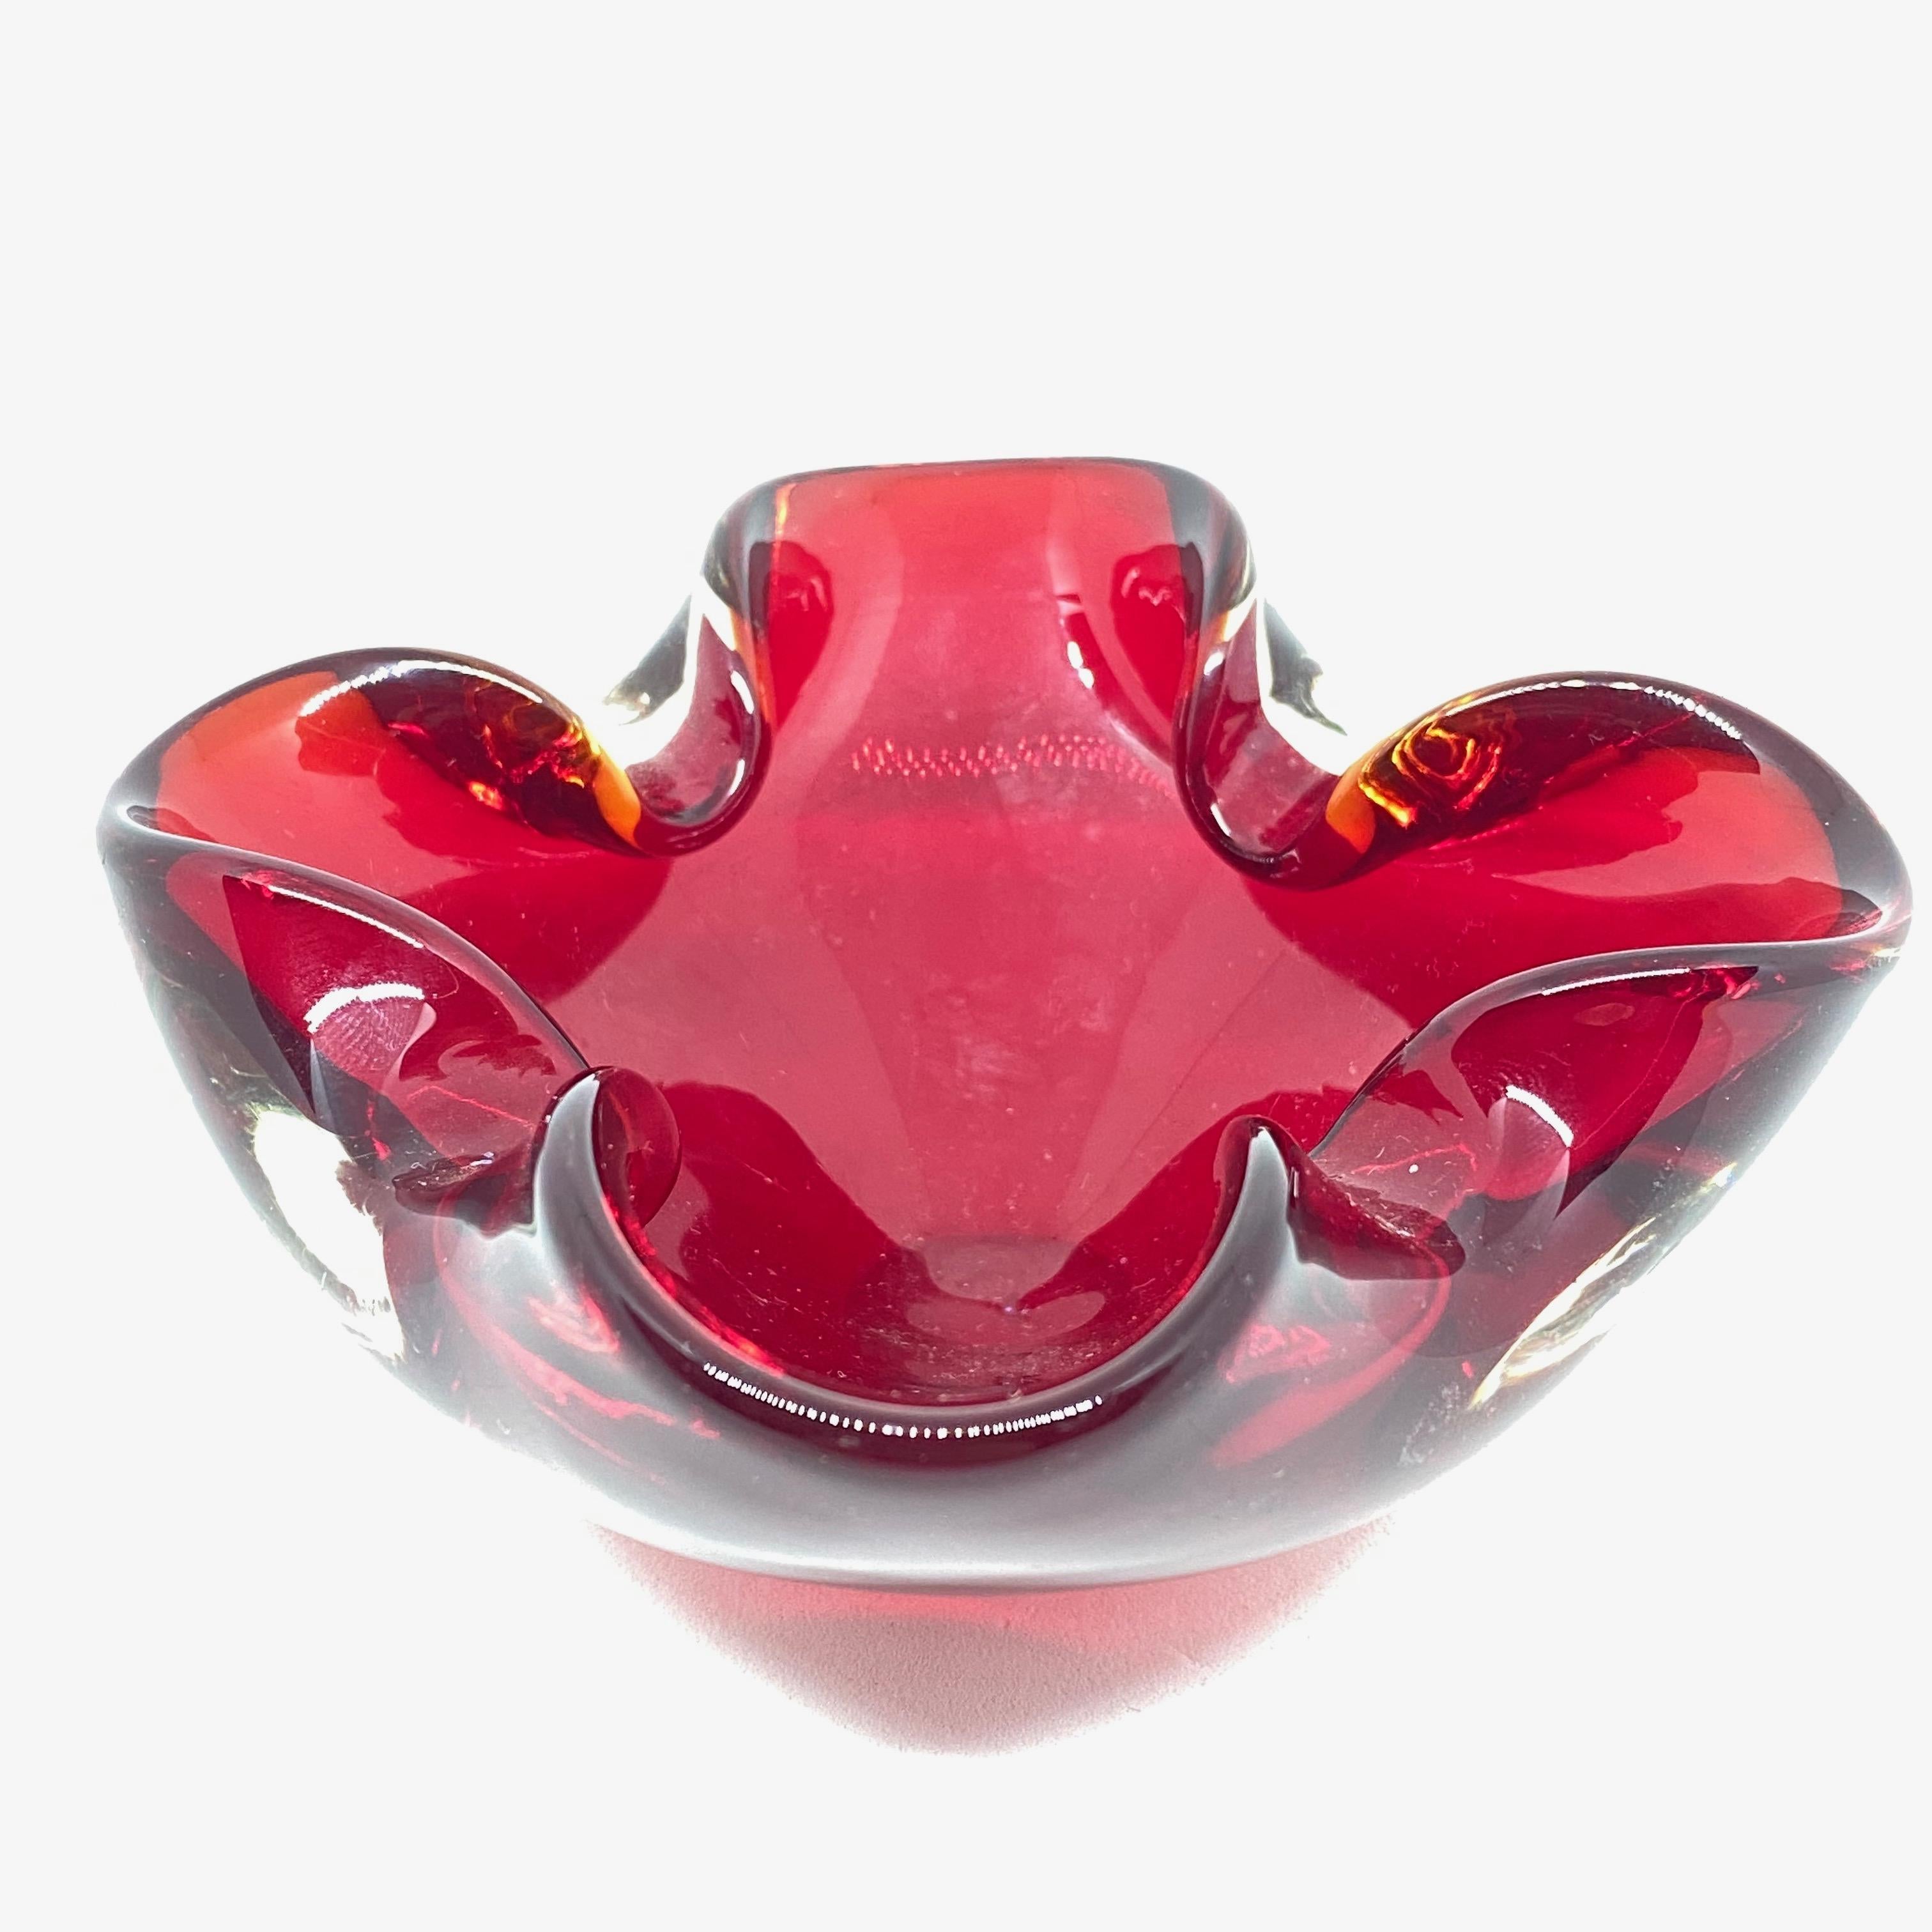 Gorgeous hand blown Murano art glass piece with Sommerso and bullicante techniques. A beautiful organic shaped bowl, catchall or ashtray in deep red, Italy, 1970s.